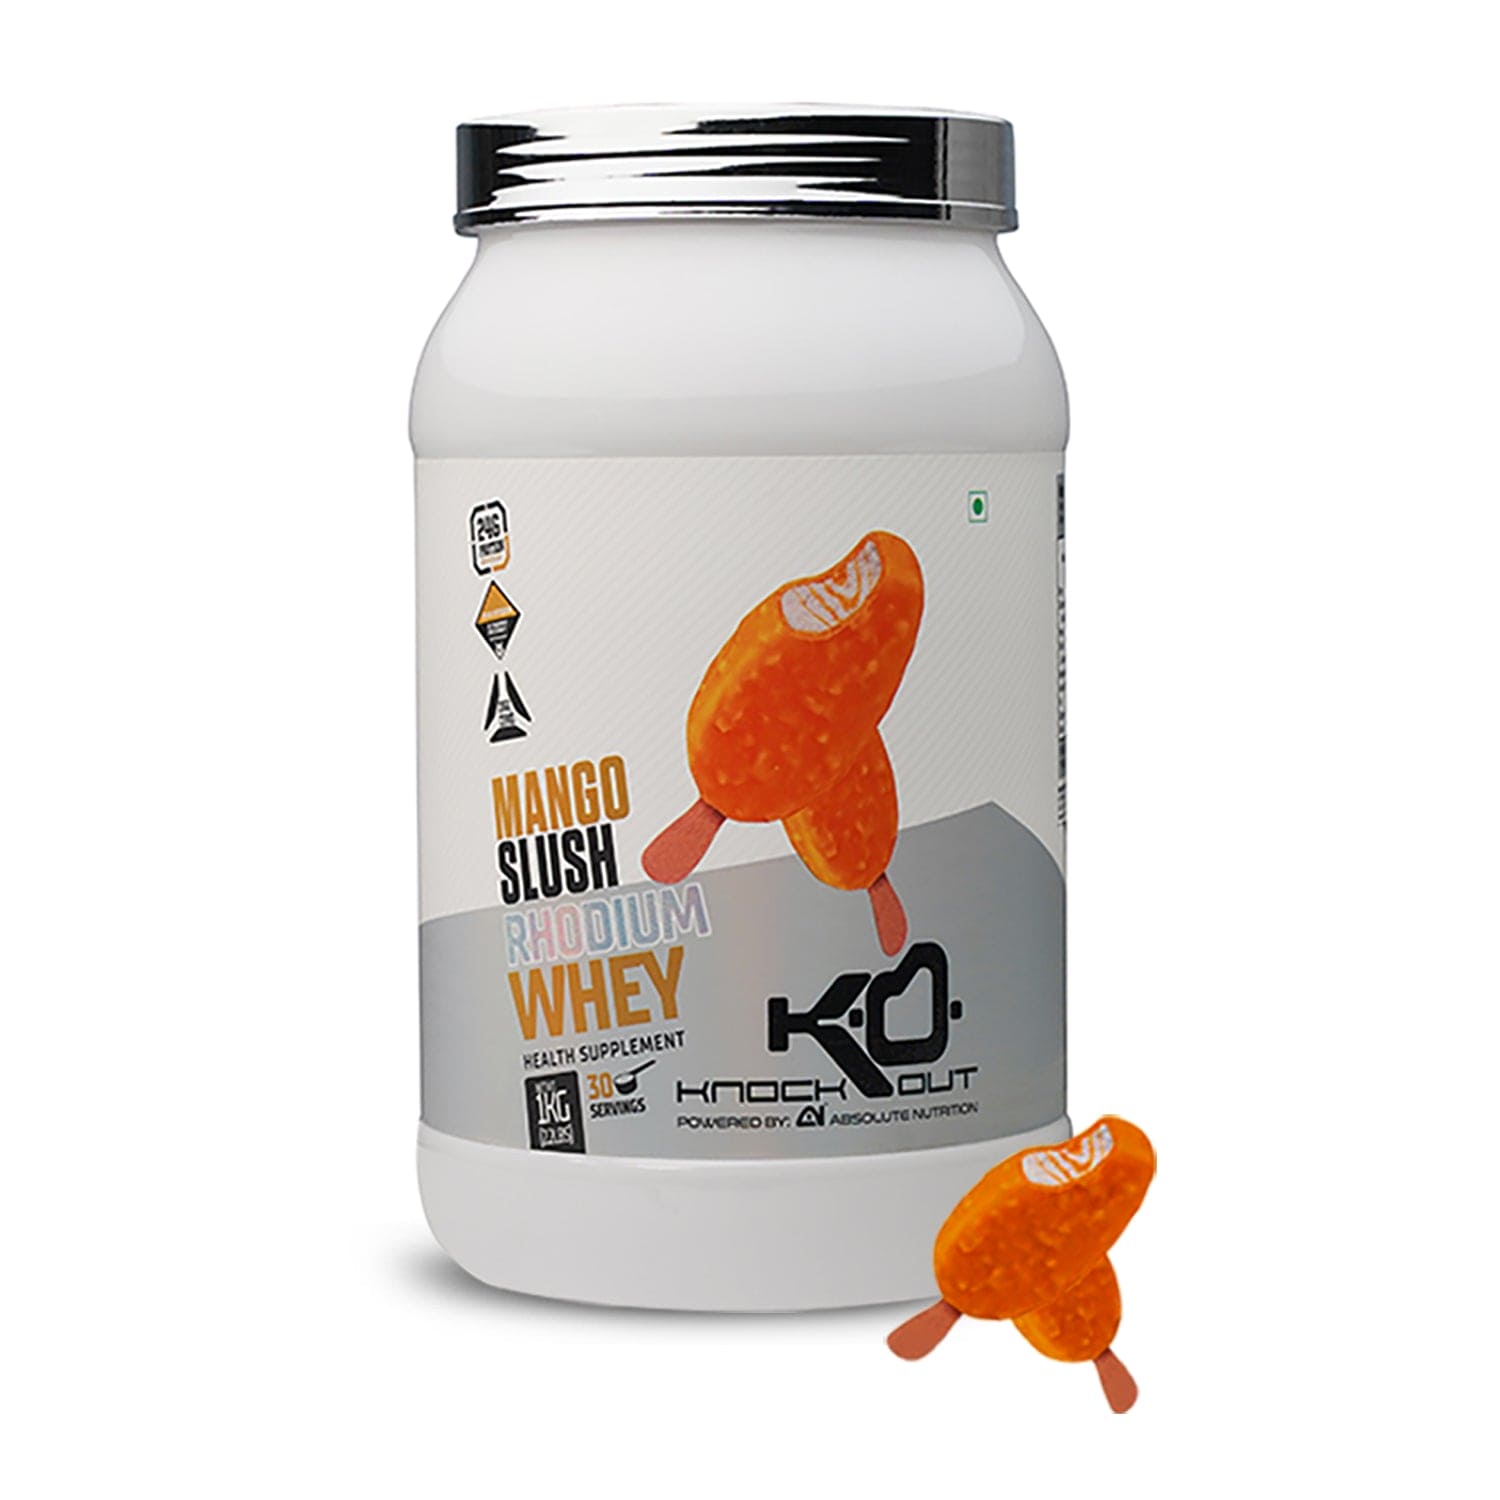 best whey protein blend for muscle growth, best whey protein for muscle gain, best whey blend protein powder, best whey protein blend, Rhodium whey protein blend by knockout by absolute nutrition, best indian whey blend protein , Rhodium whey protein with free shaker, best protein powder by knockout by absolute nutrition